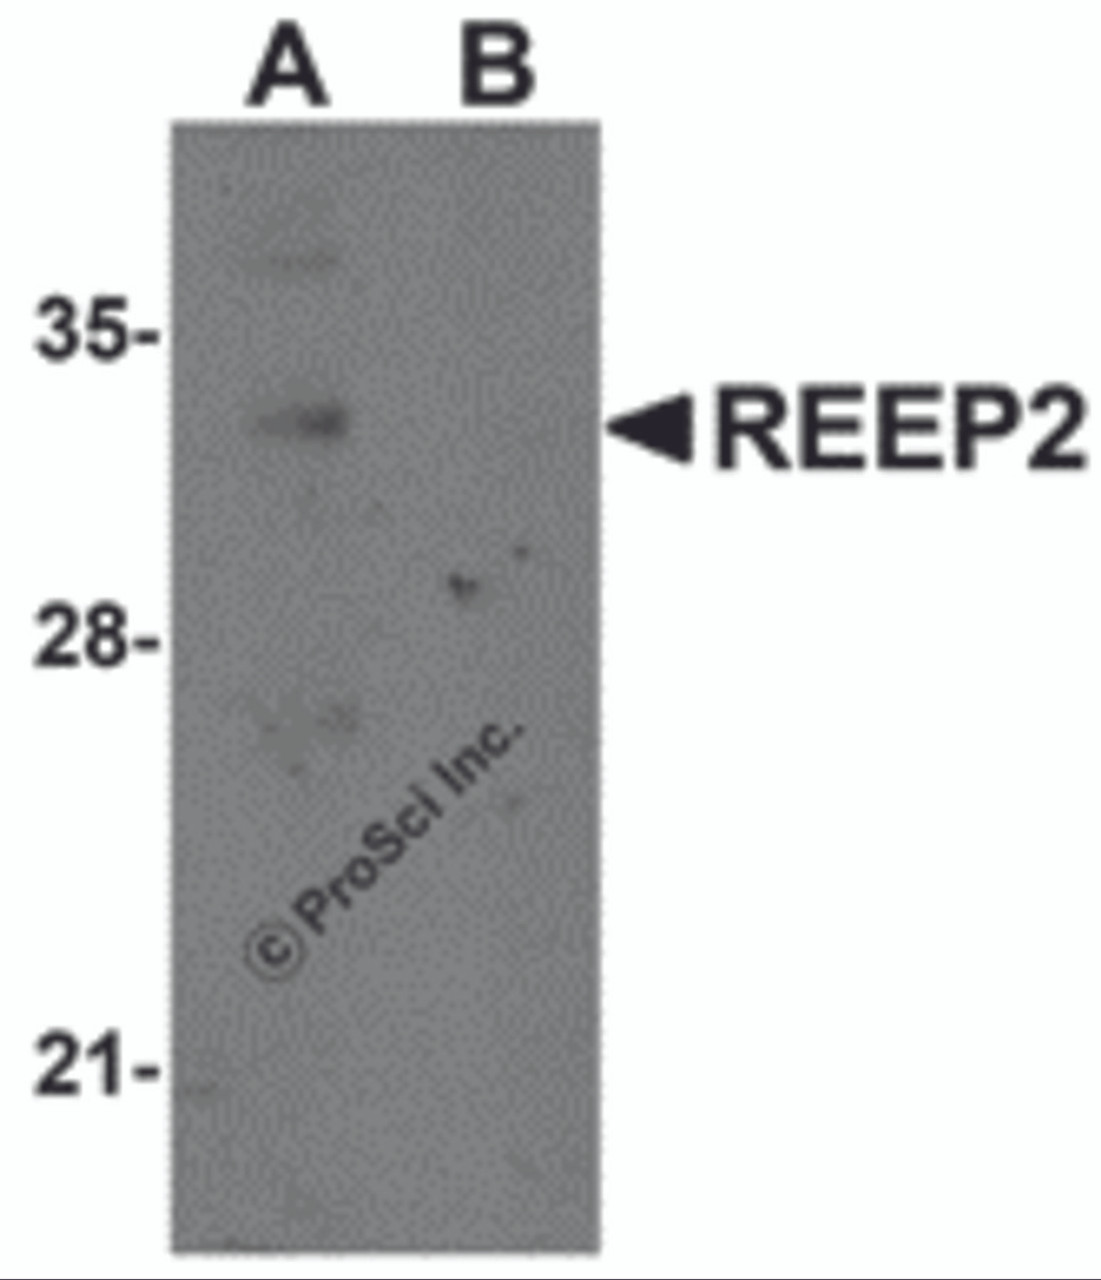 Western blot analysis of REEP2 in mouse lung tissue lysate with REEP2 antibody at 1 &#956;g/mL in (A) the absence and (B) the presence of blocking peptide.